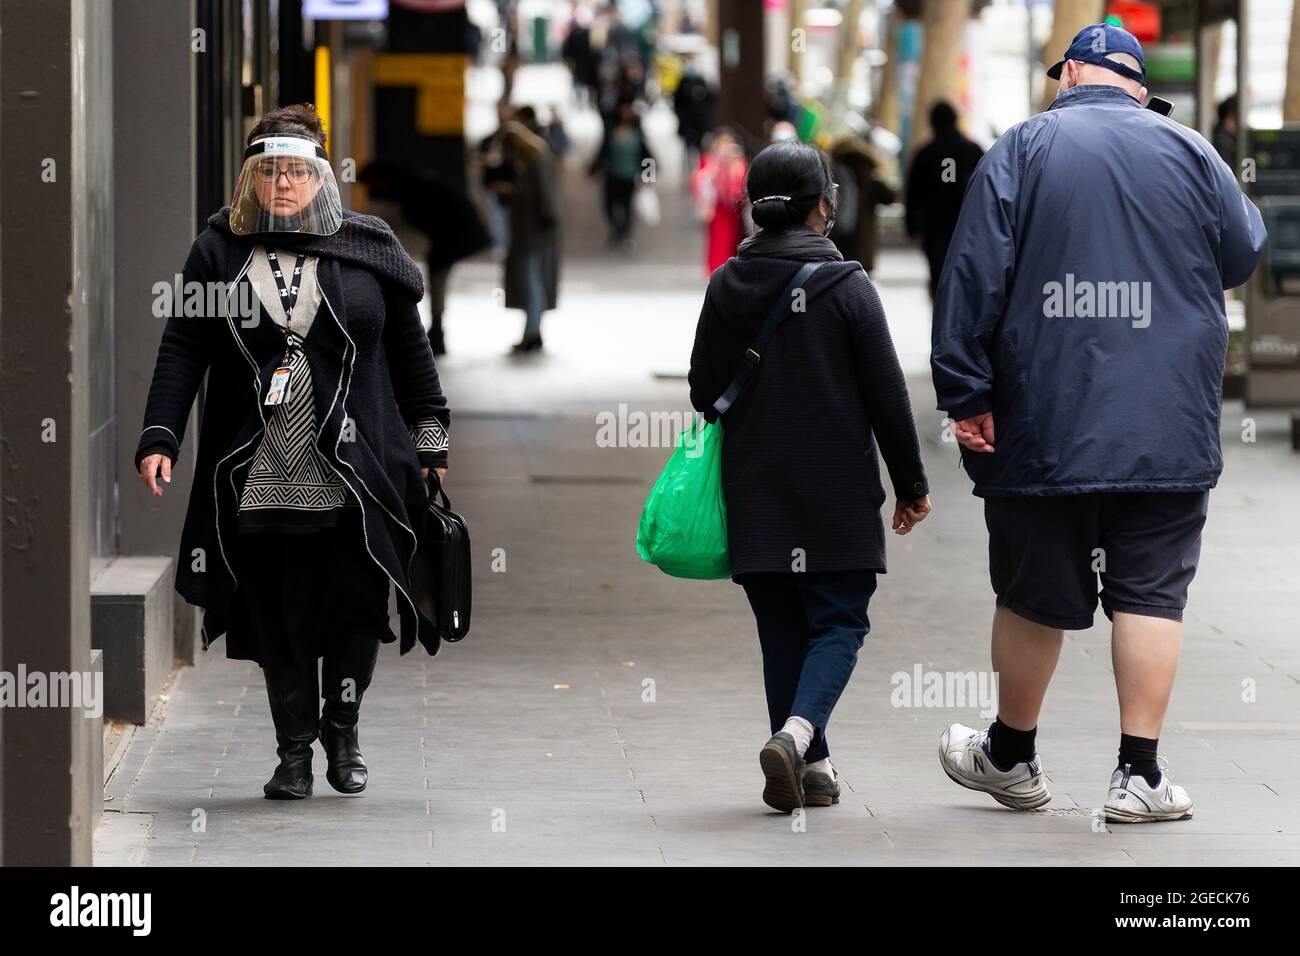 Melbourne, Australia, 23 July, 2020. A woman is seen walking in the CBD as she wears a full face shield in Melbourne as the Victorian Premier confirmed 403 new coronavirus cases overnight. As of 11.59pm on Wednesday 22 July, people living in metropolitan Melbourne and Mitchell Shire and will now be required to wear a face covering when leaving home, following a concerning increase in coronavirus cases in recent days. The fine for not wearing a face covering will be $200. Credit: Dave Hewison/Speed Media/Alamy Live News Stock Photo